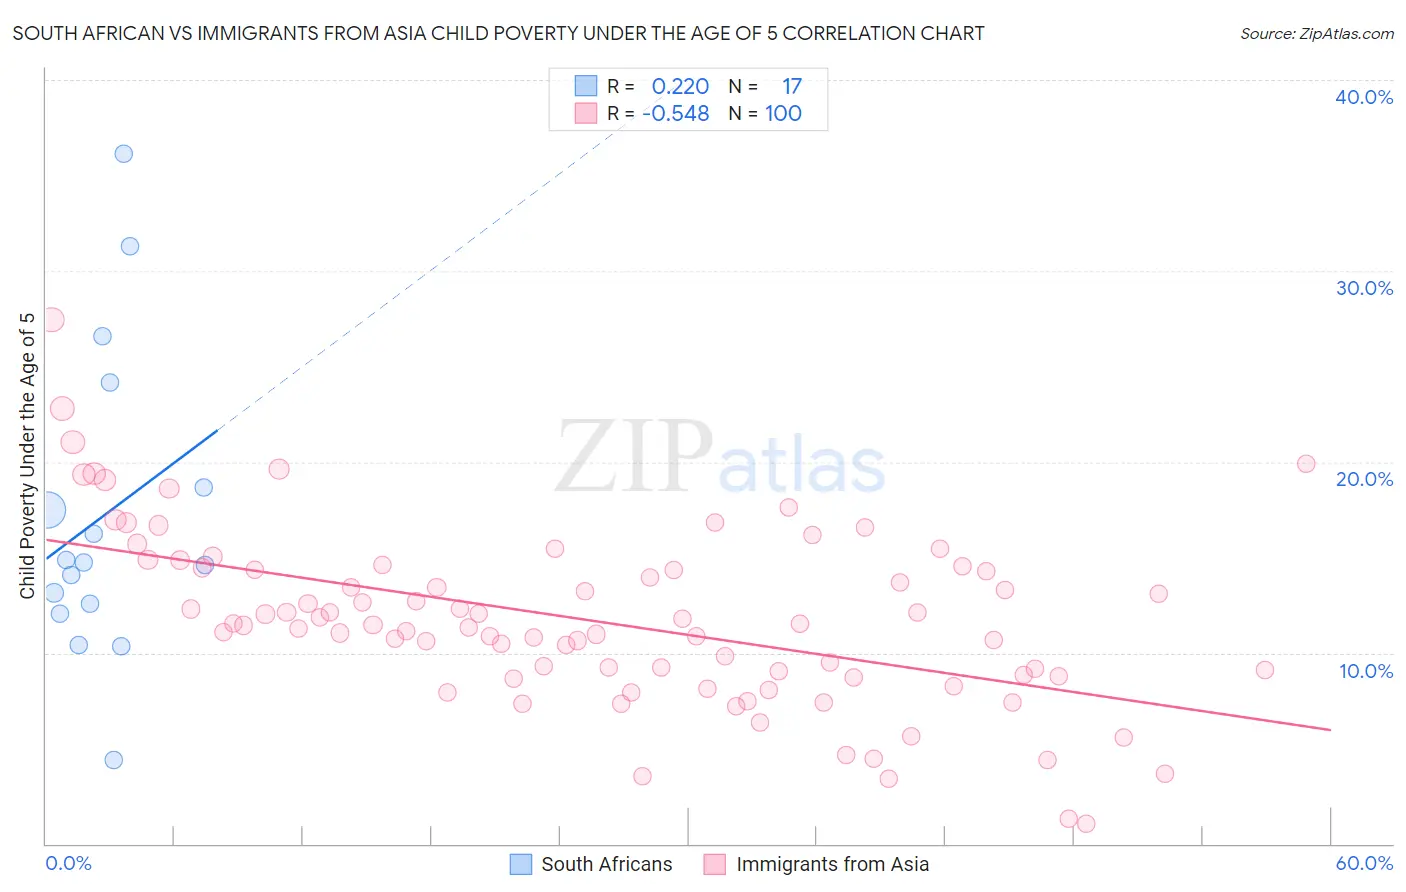 South African vs Immigrants from Asia Child Poverty Under the Age of 5